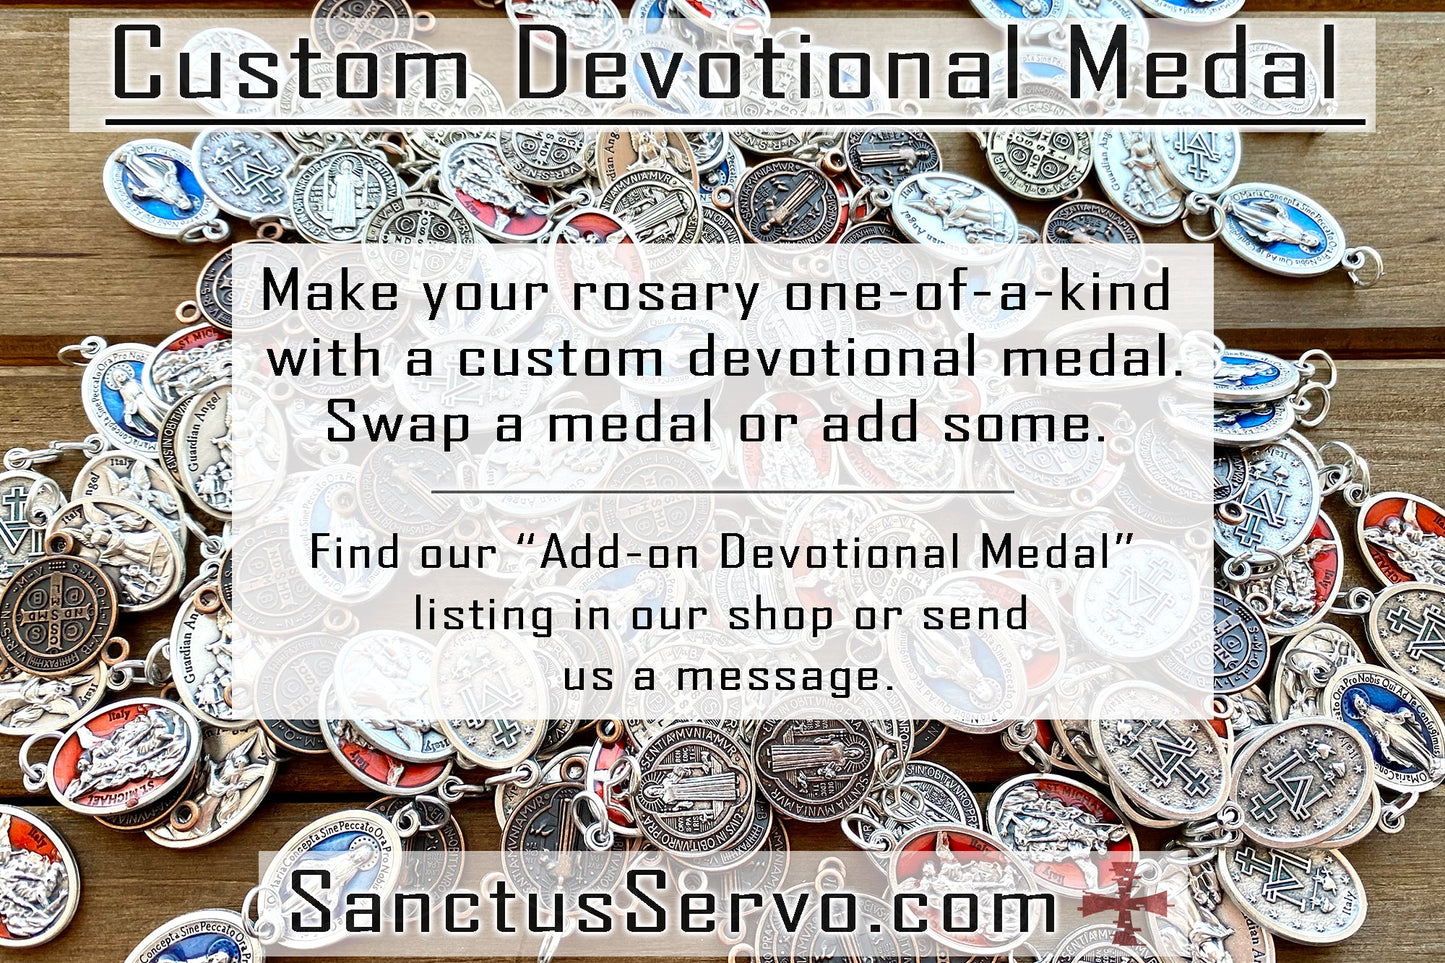 Elevate your rosary with an add-on devotional medal from Sanctus Servo - your go-to source for premium Catholic patron saint medals. Customize your rosary and strengthen your faith with over 60 options to choose from, perfect for honoring a patron saint or adding a personal touch to your beloved rosary. Shop now and create an unbreakable spiritual weapon!